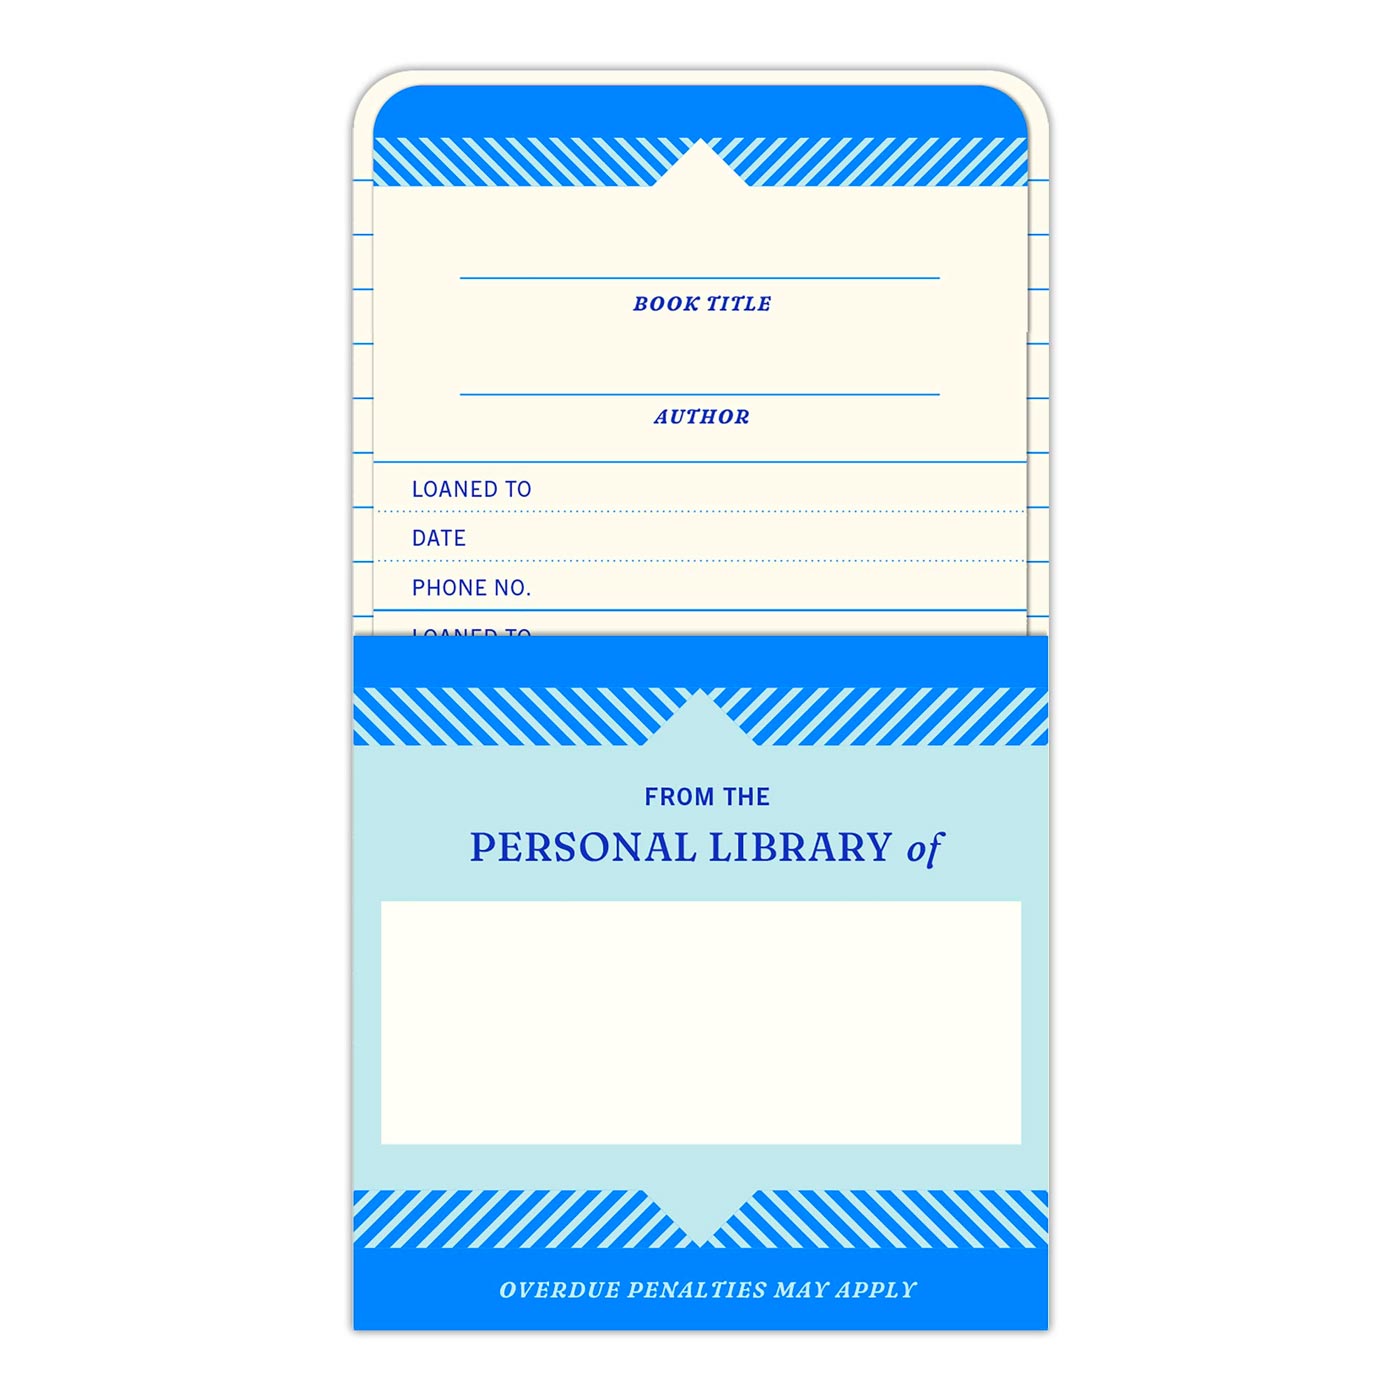 Personal Library - Home Librarian Kit